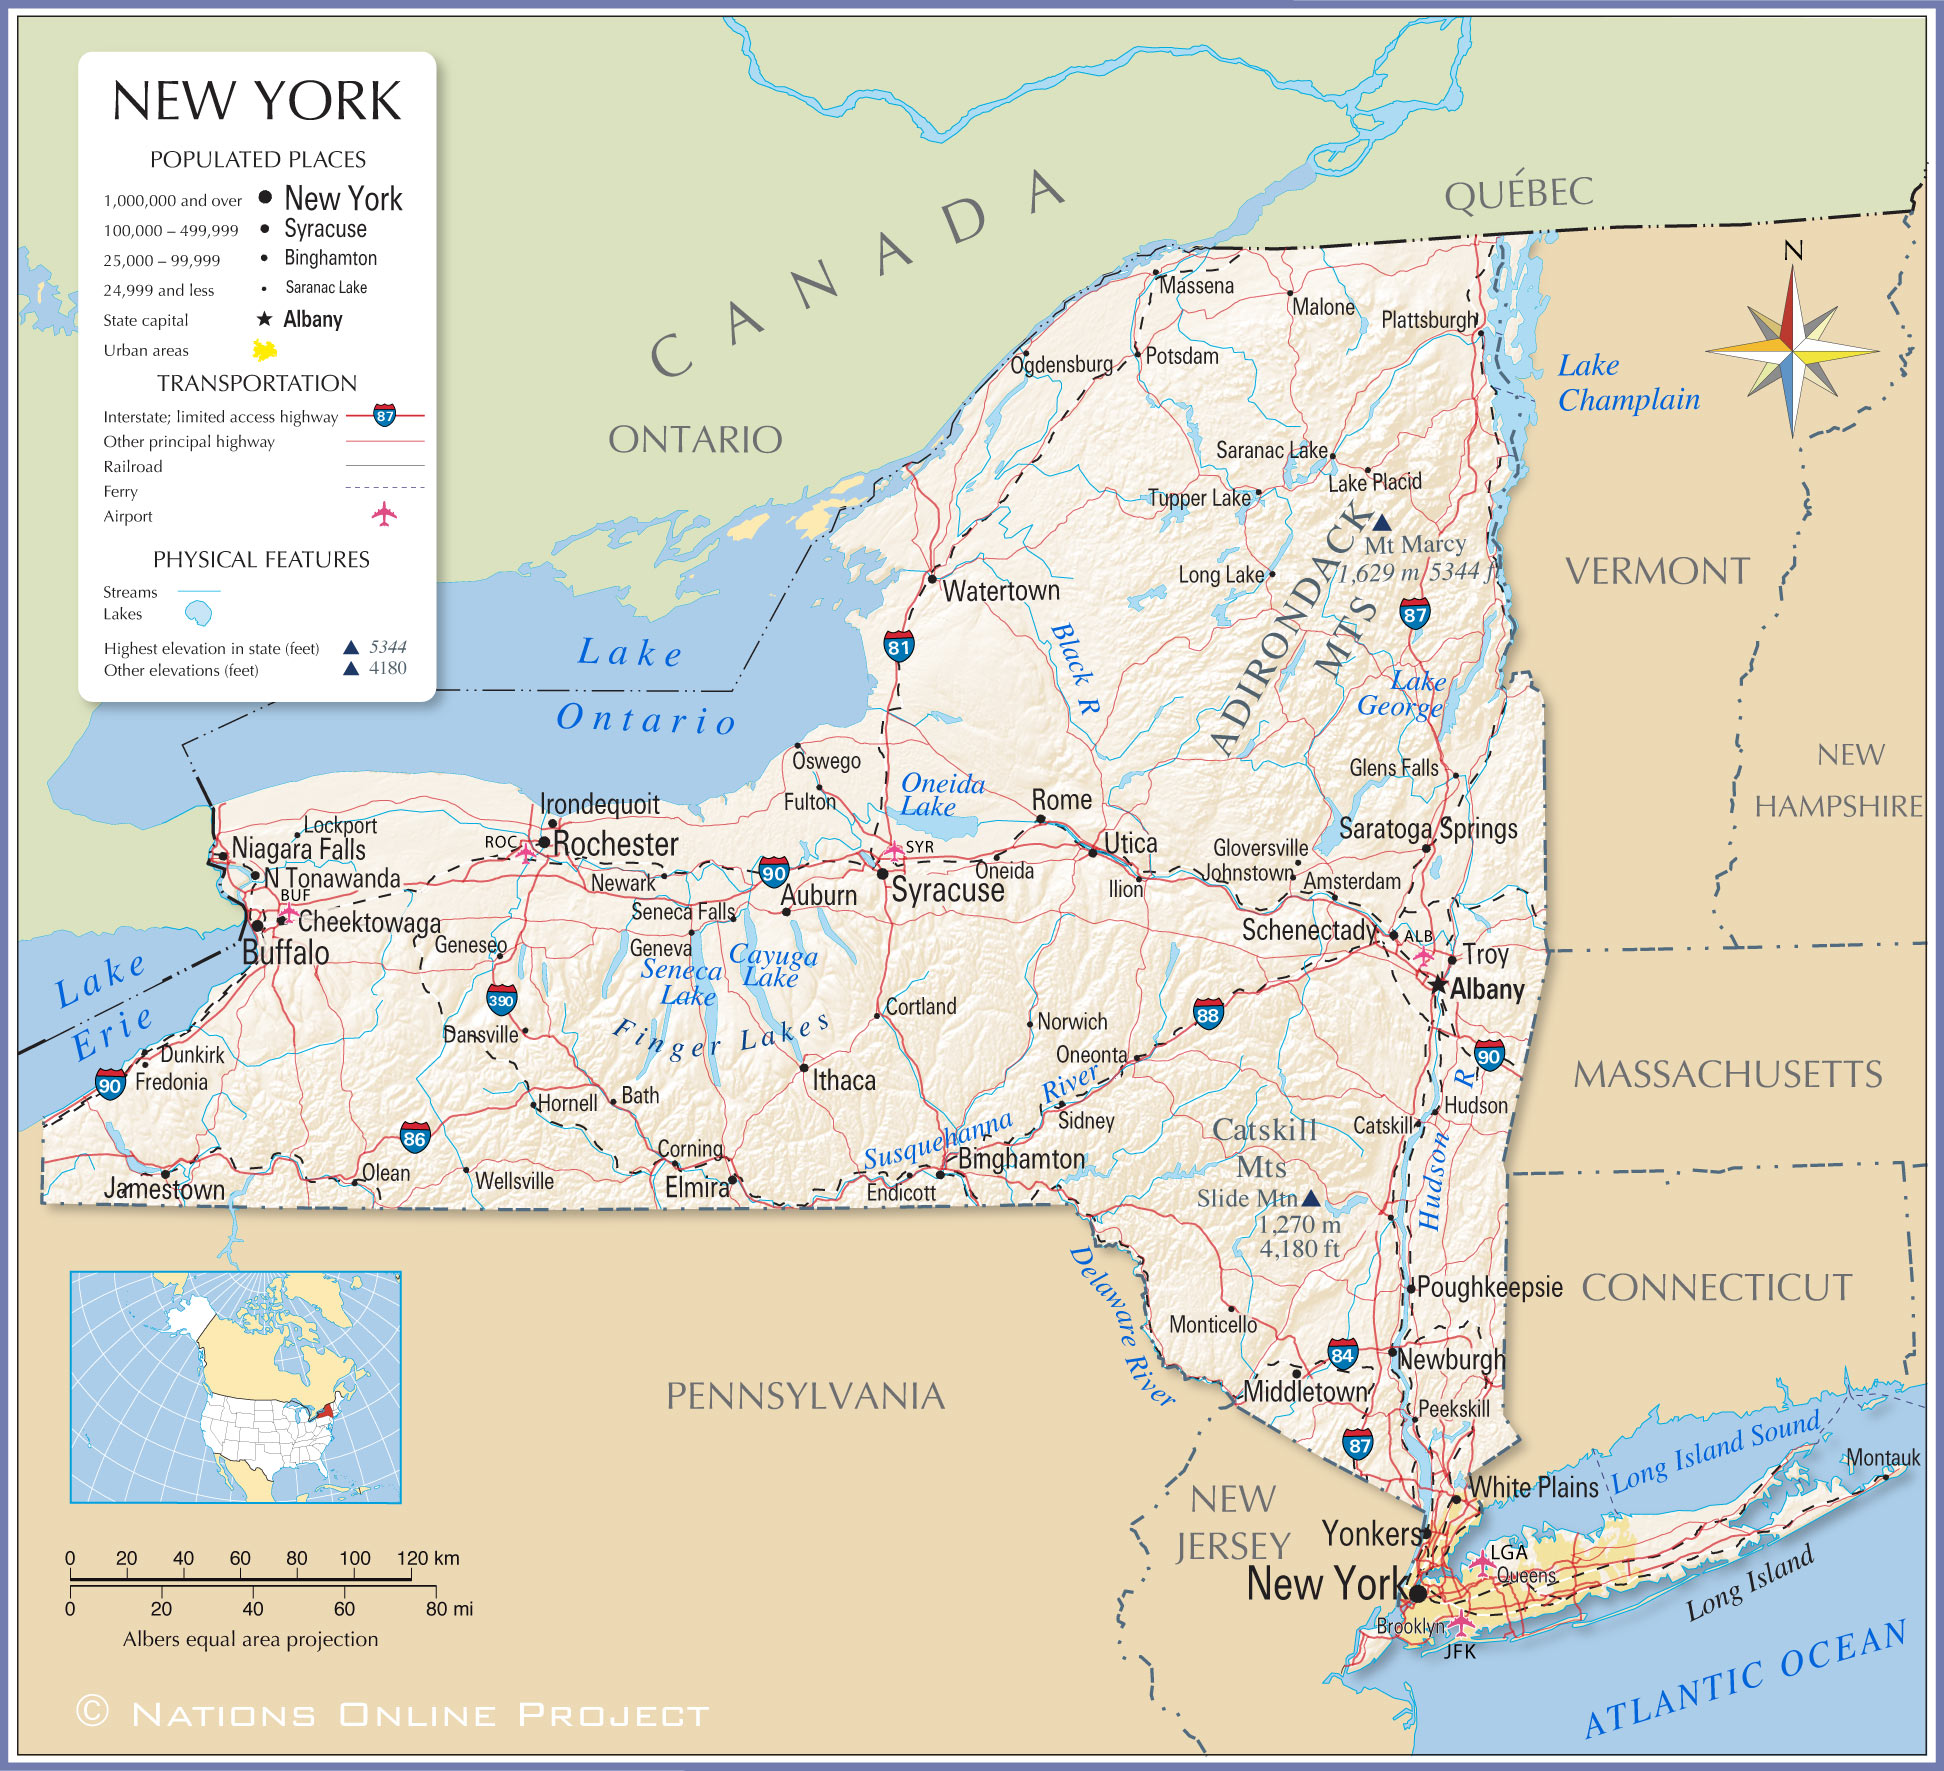 map of new york cities and towns Map Of The State Of New York Usa Nations Online Project map of new york cities and towns